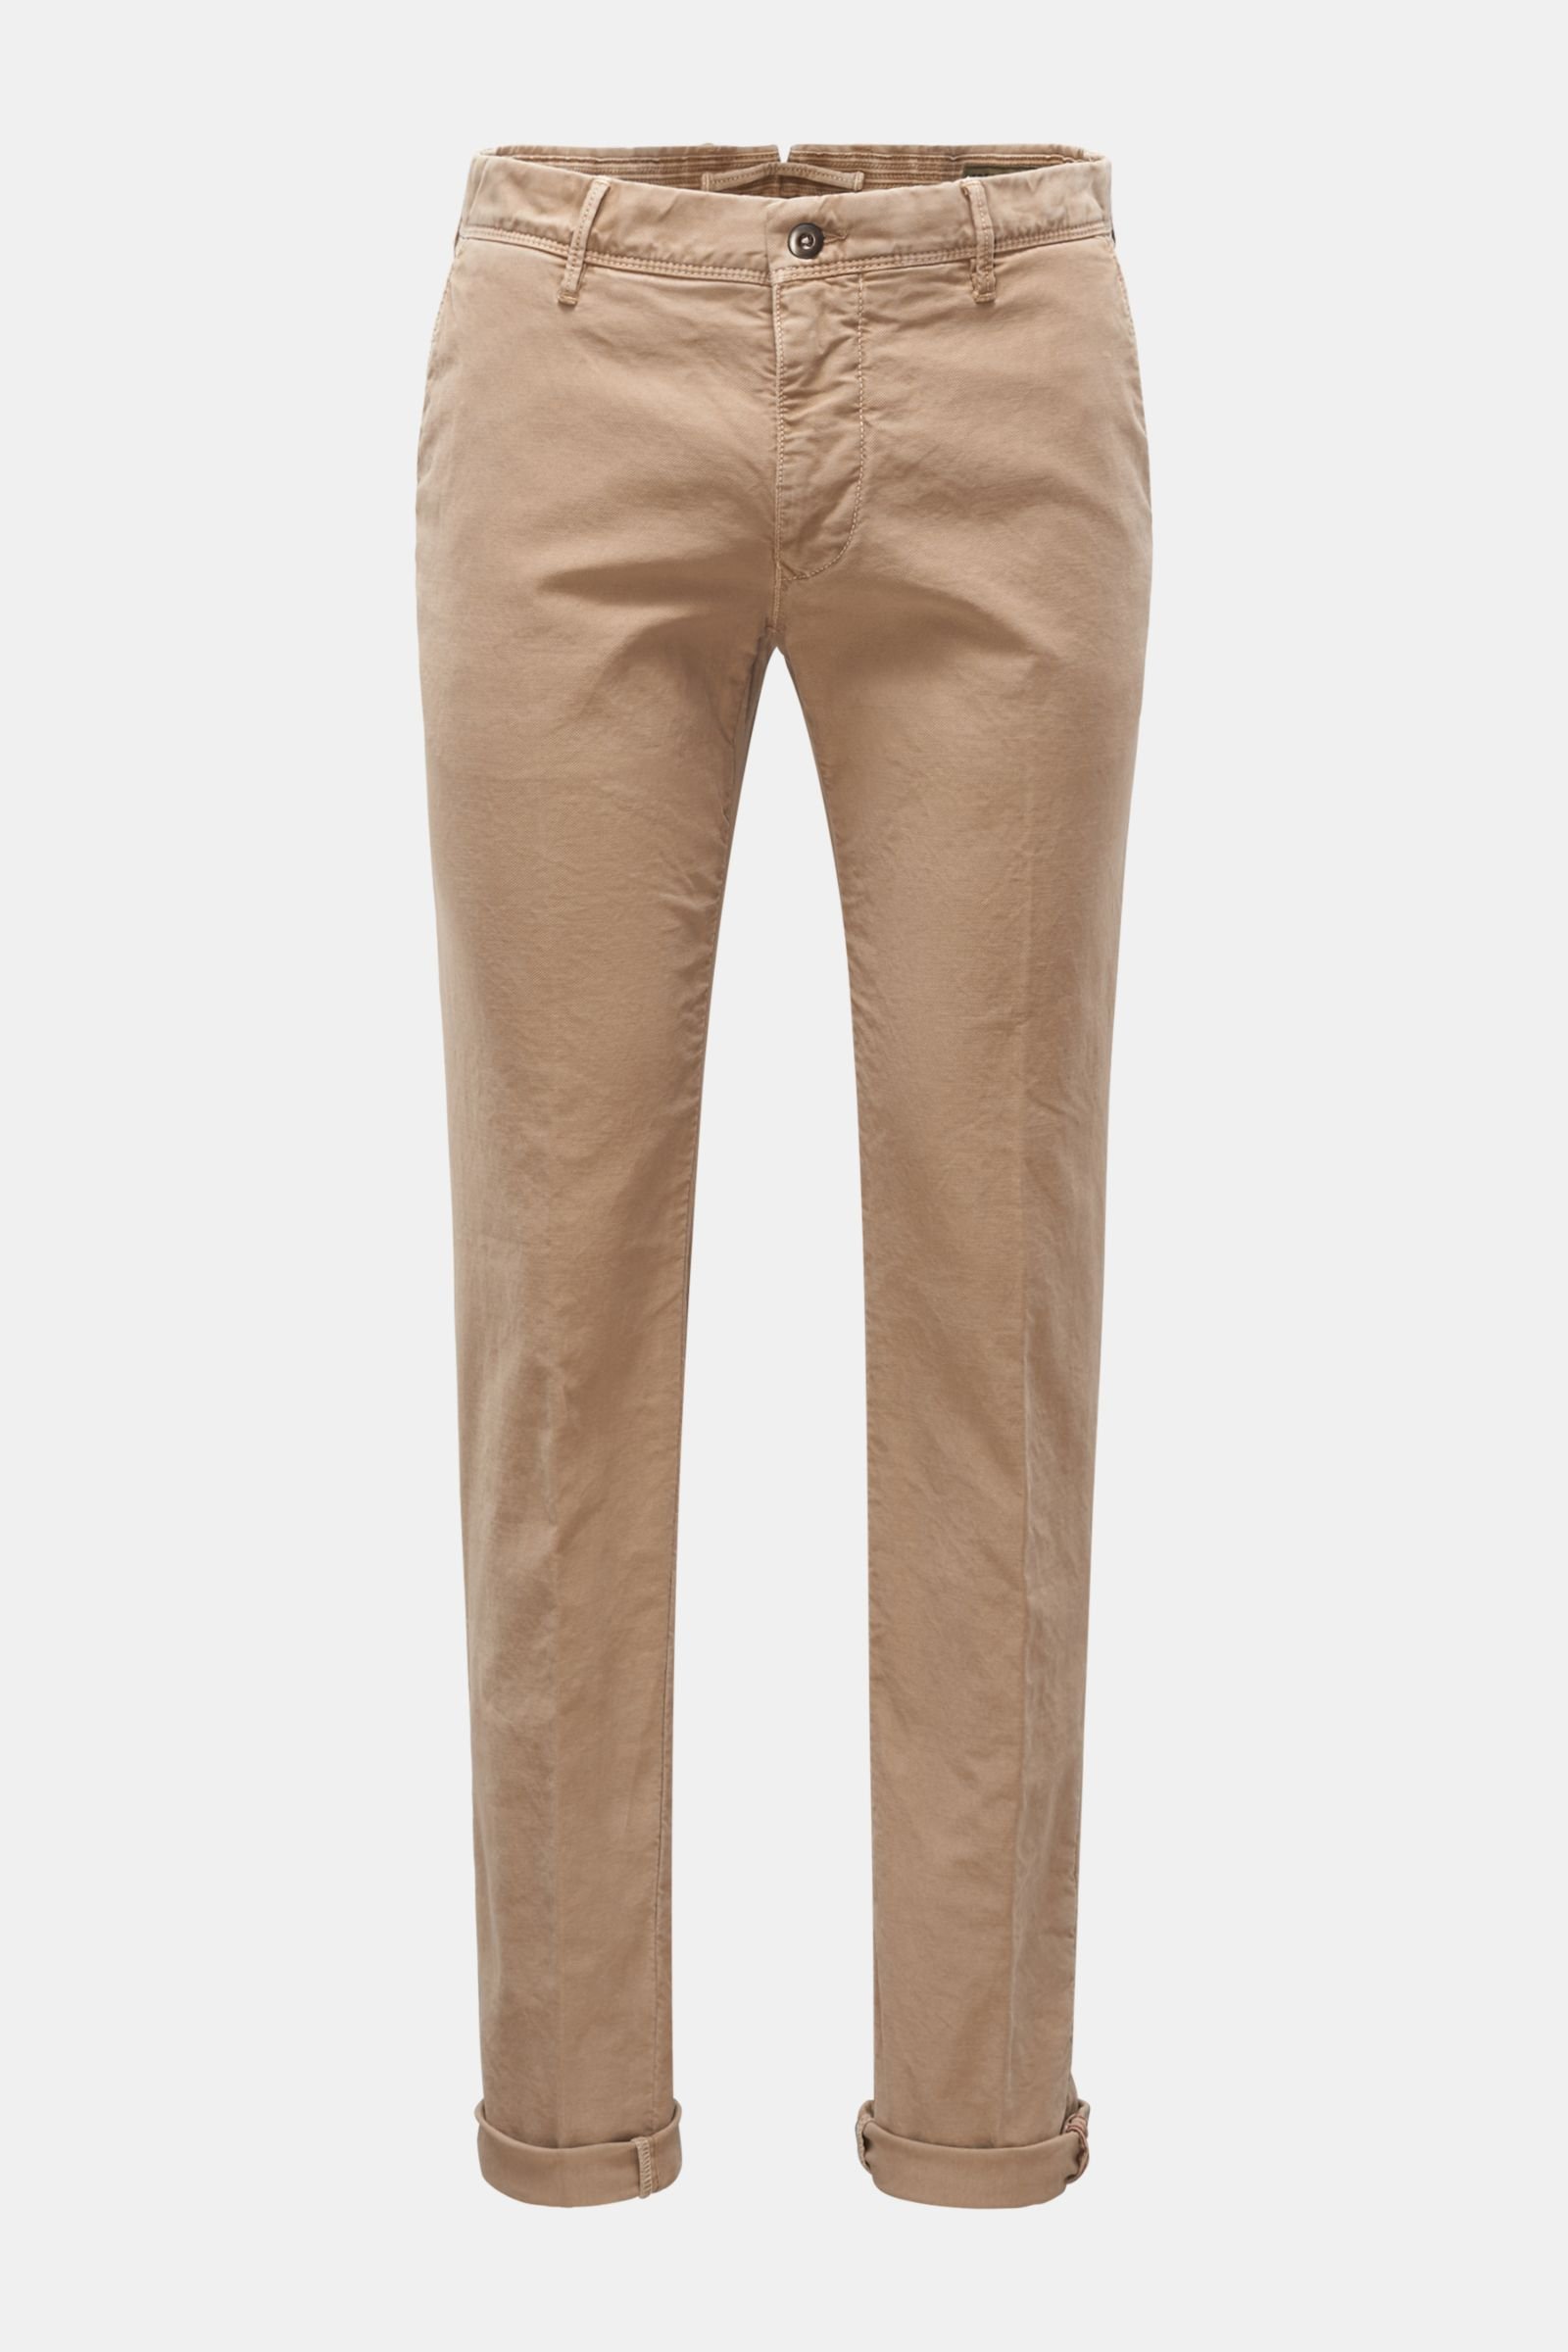 Cotton trousers light brown